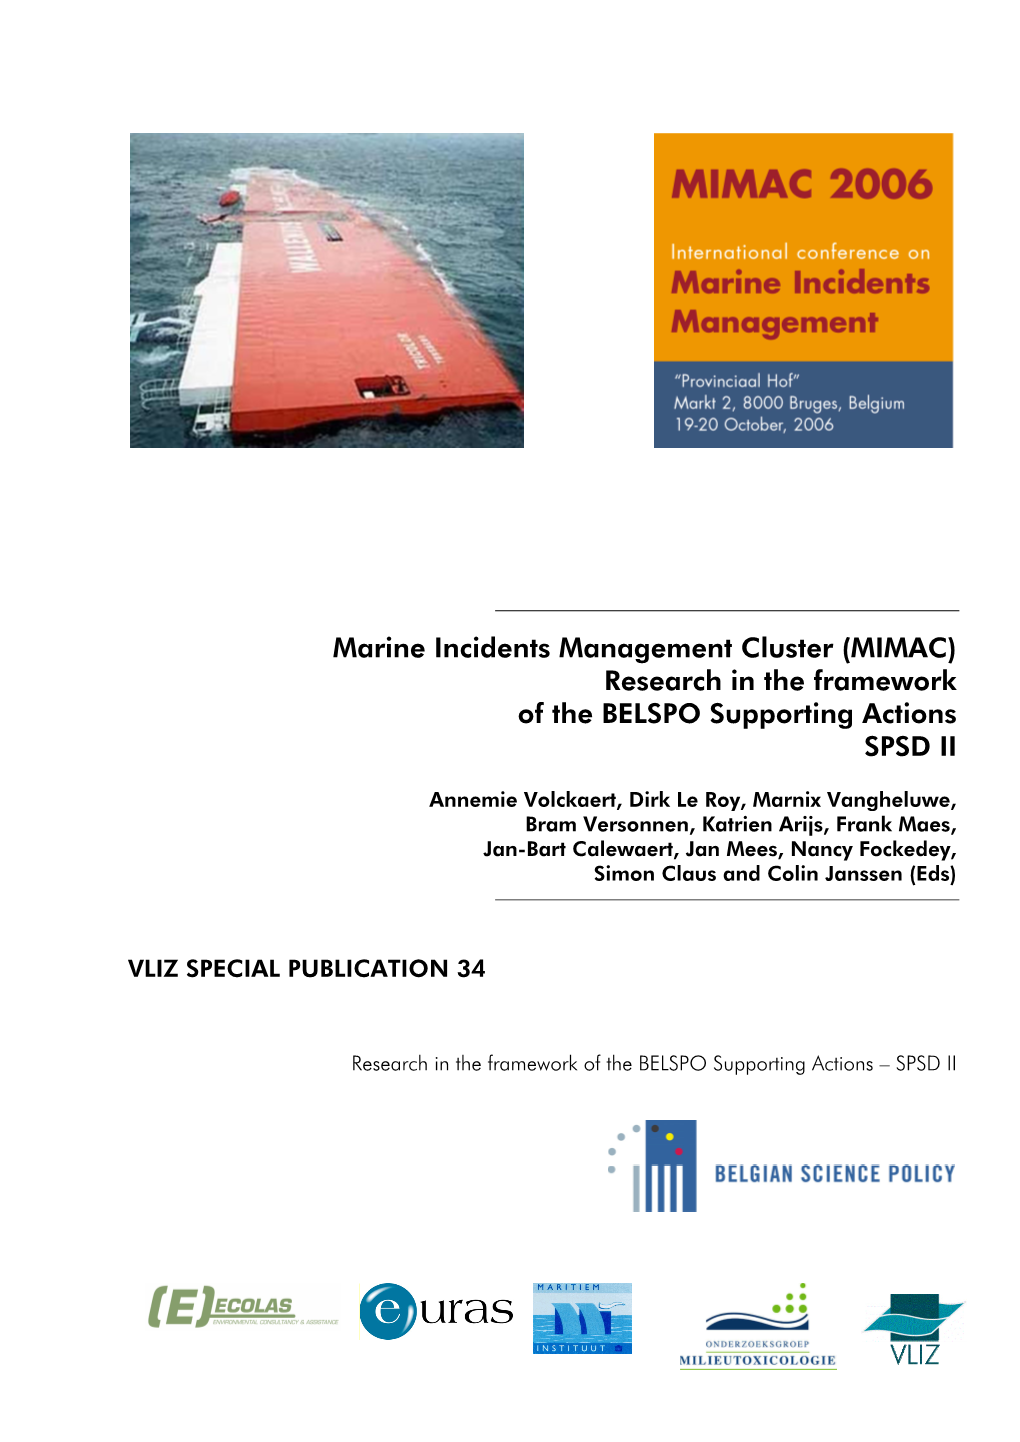 MIMAC) Research in the Framework of the BELSPO Supporting Actions SPSD II